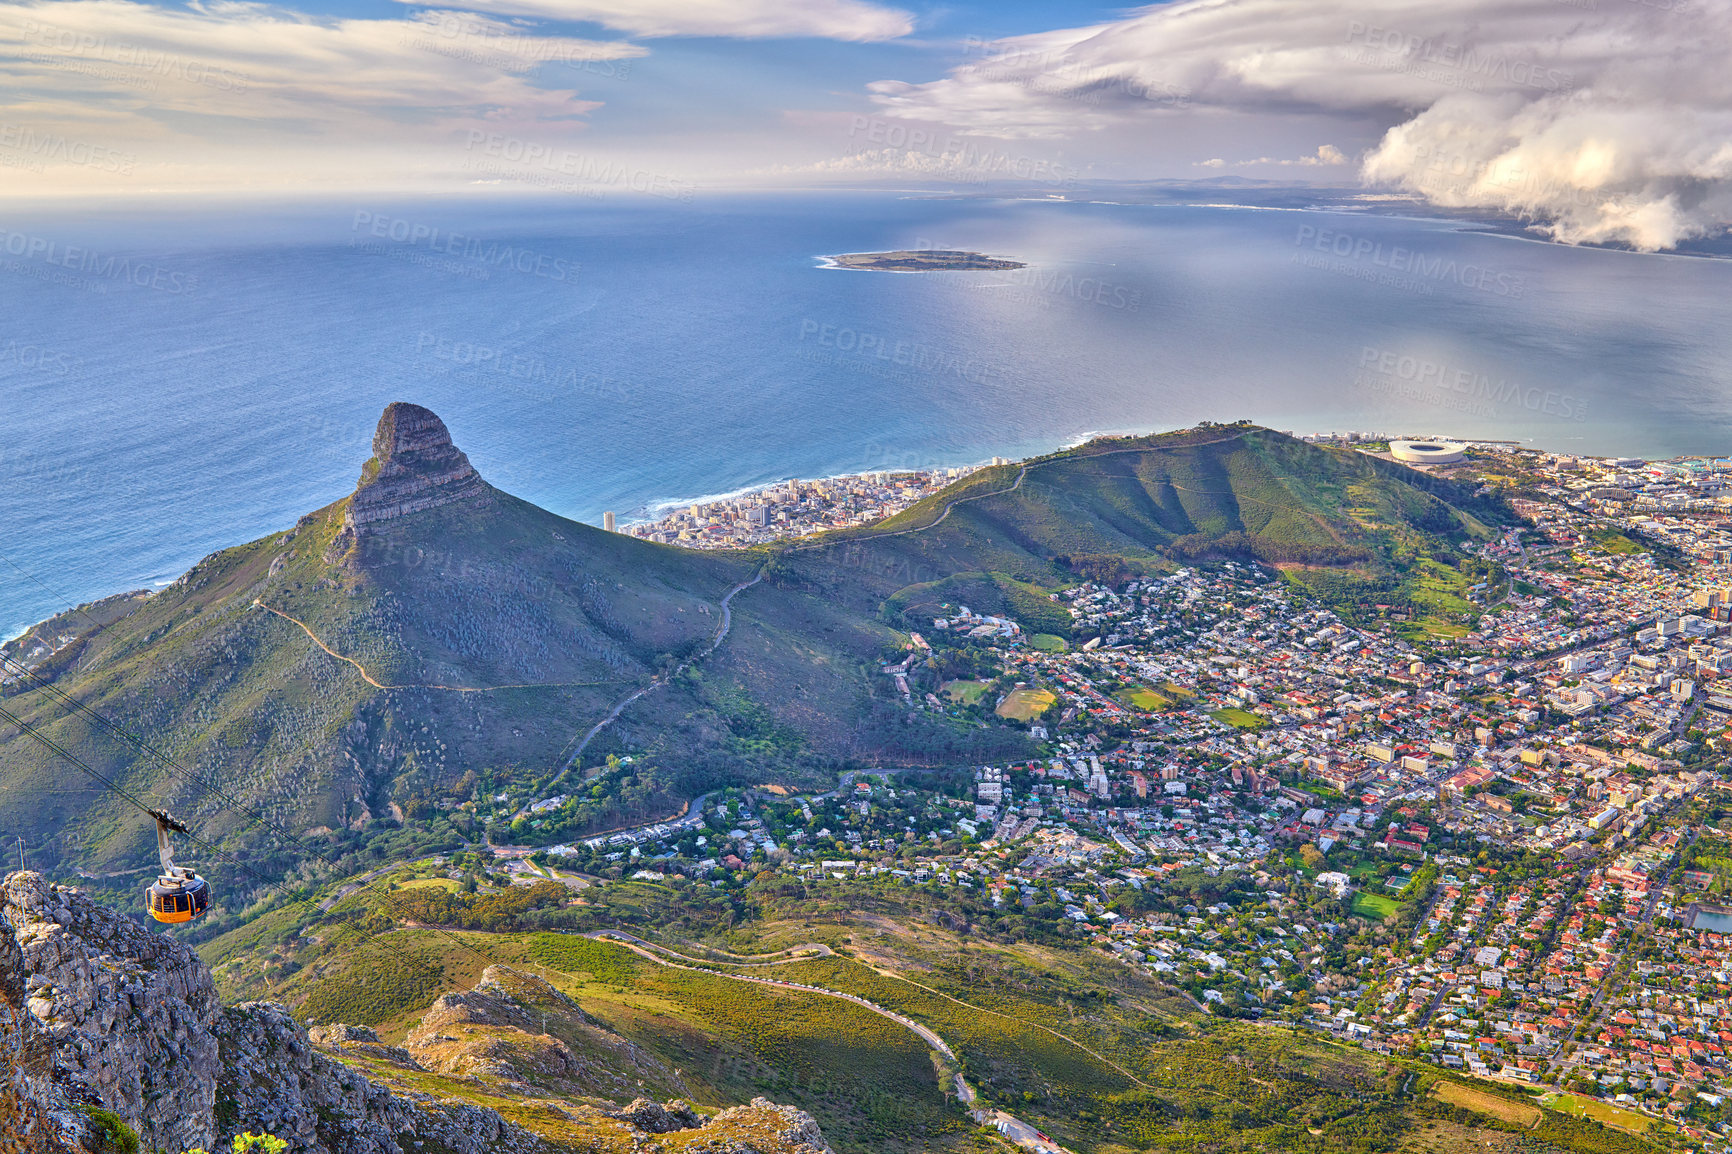 Buy stock photo Aerial view of Lions Head mountain with the ocean and a cloudy sky copy space. Beautiful landscape of green mountains with vegetation surrounding an urban city in Cape Town, South Africa